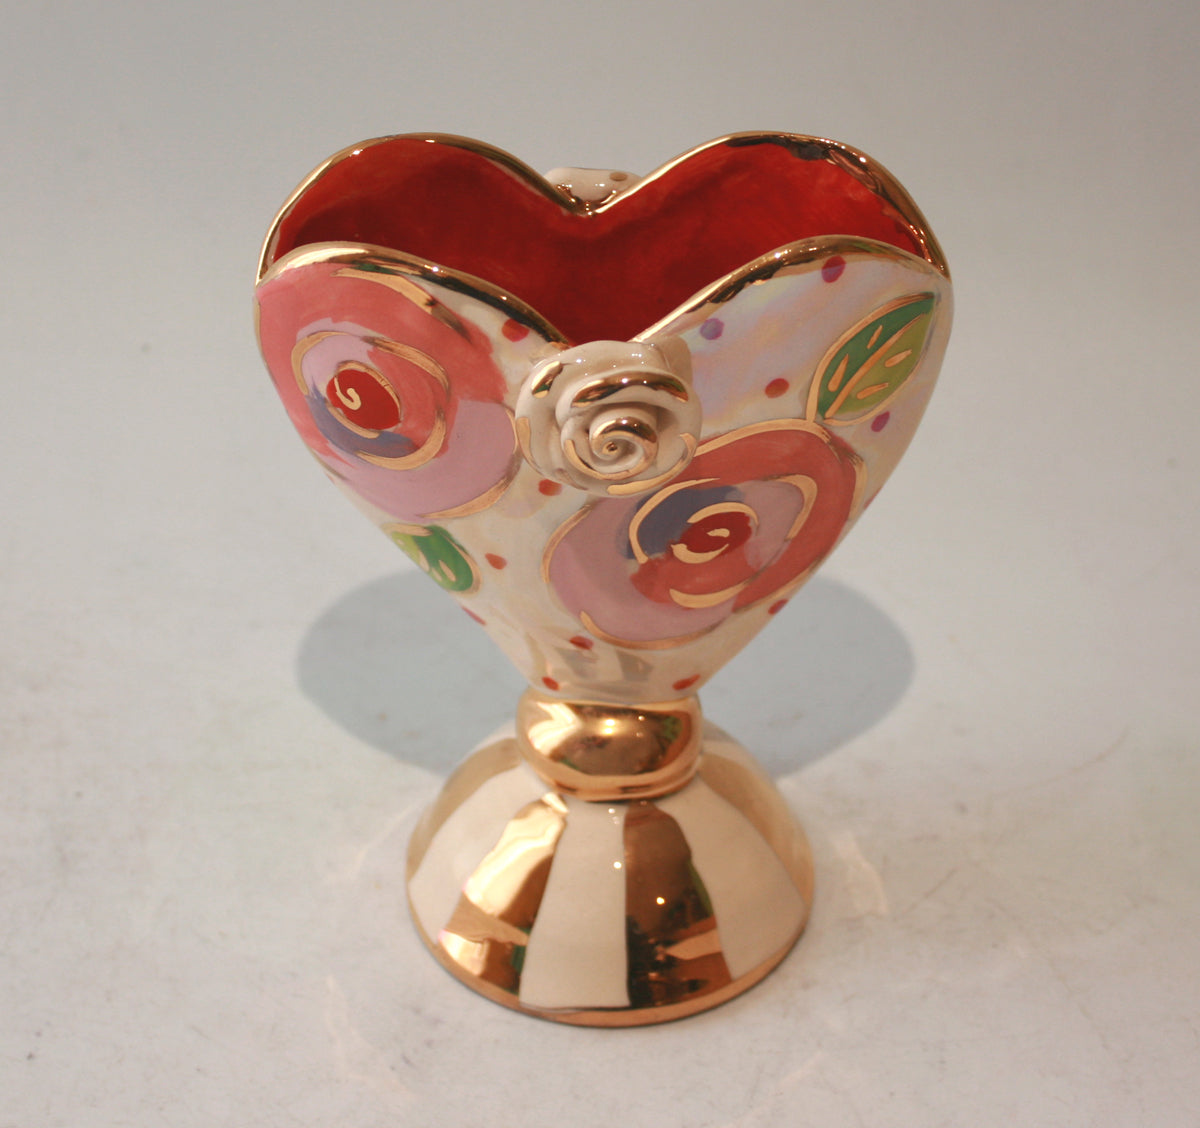 Baby Heart Vase in Gold New Rose on Pink Dots